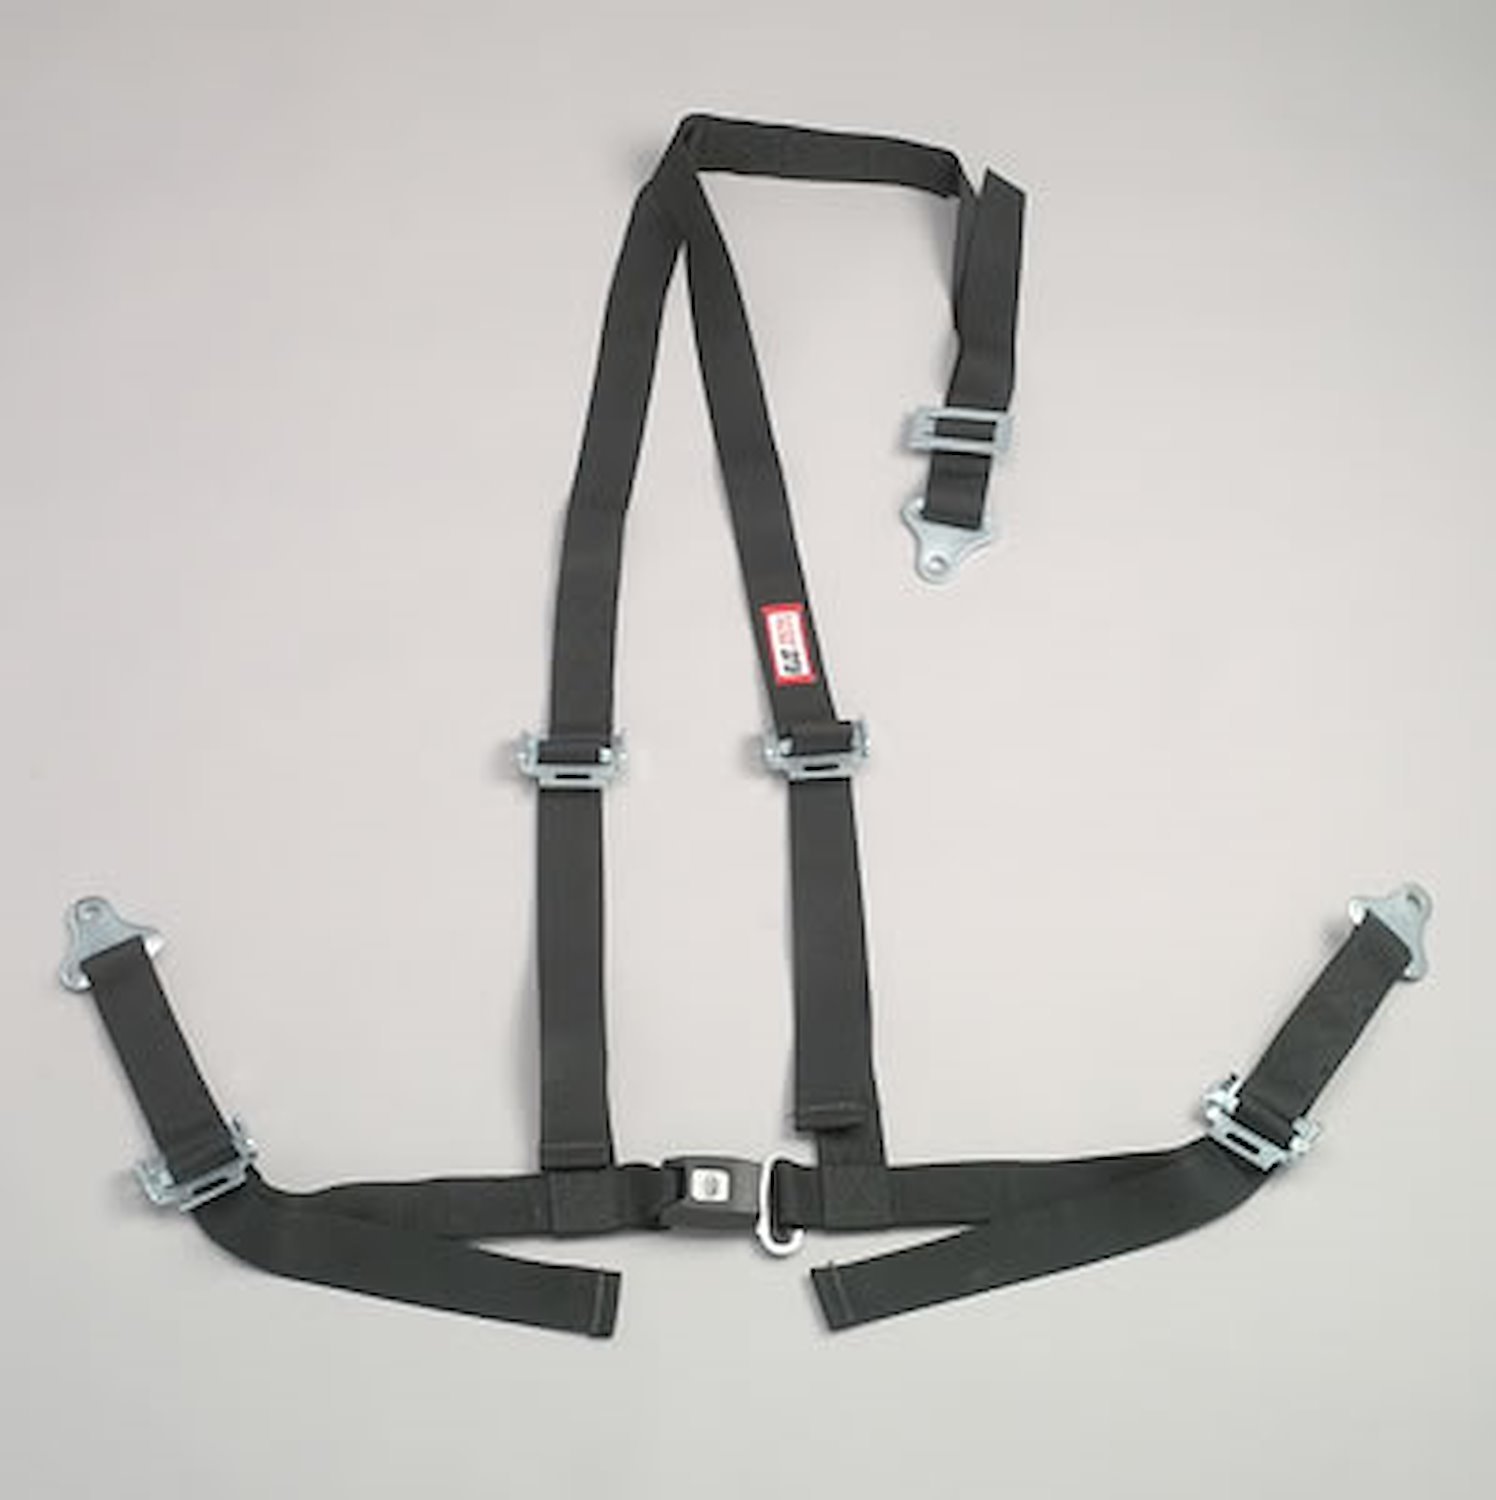 NON-SFI B&T HARNESS 2 PULL DOWN Lap Belt 2 S. H. Individual ROLL BAR Mount ALL WRAP ENDS GRAY